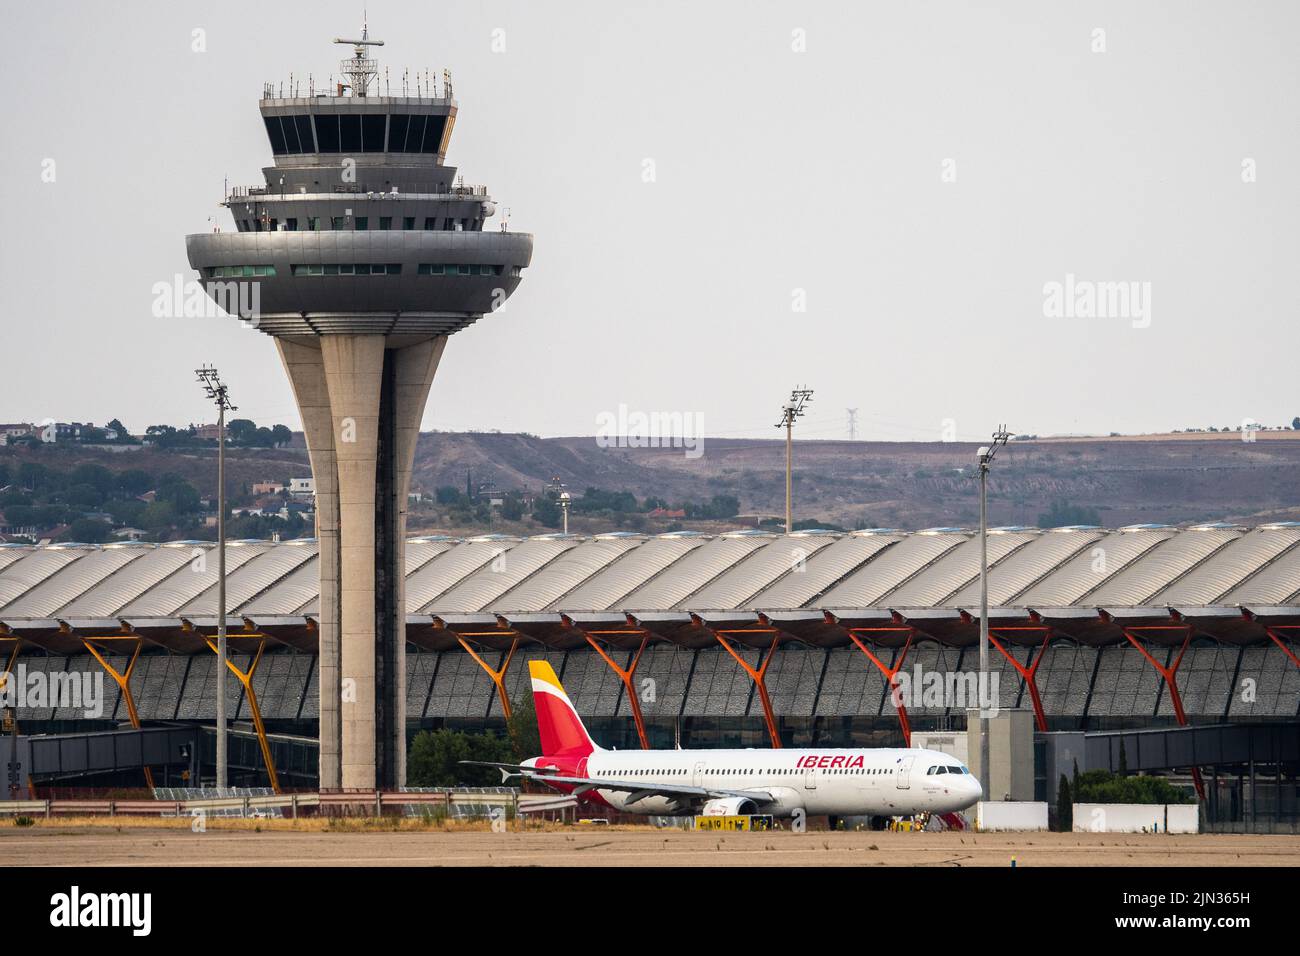 An Iberia airplane in seen on the runway at Adolfo Suarez Madrid Barajas Airport passing by the air traffic control tower. Stock Photo